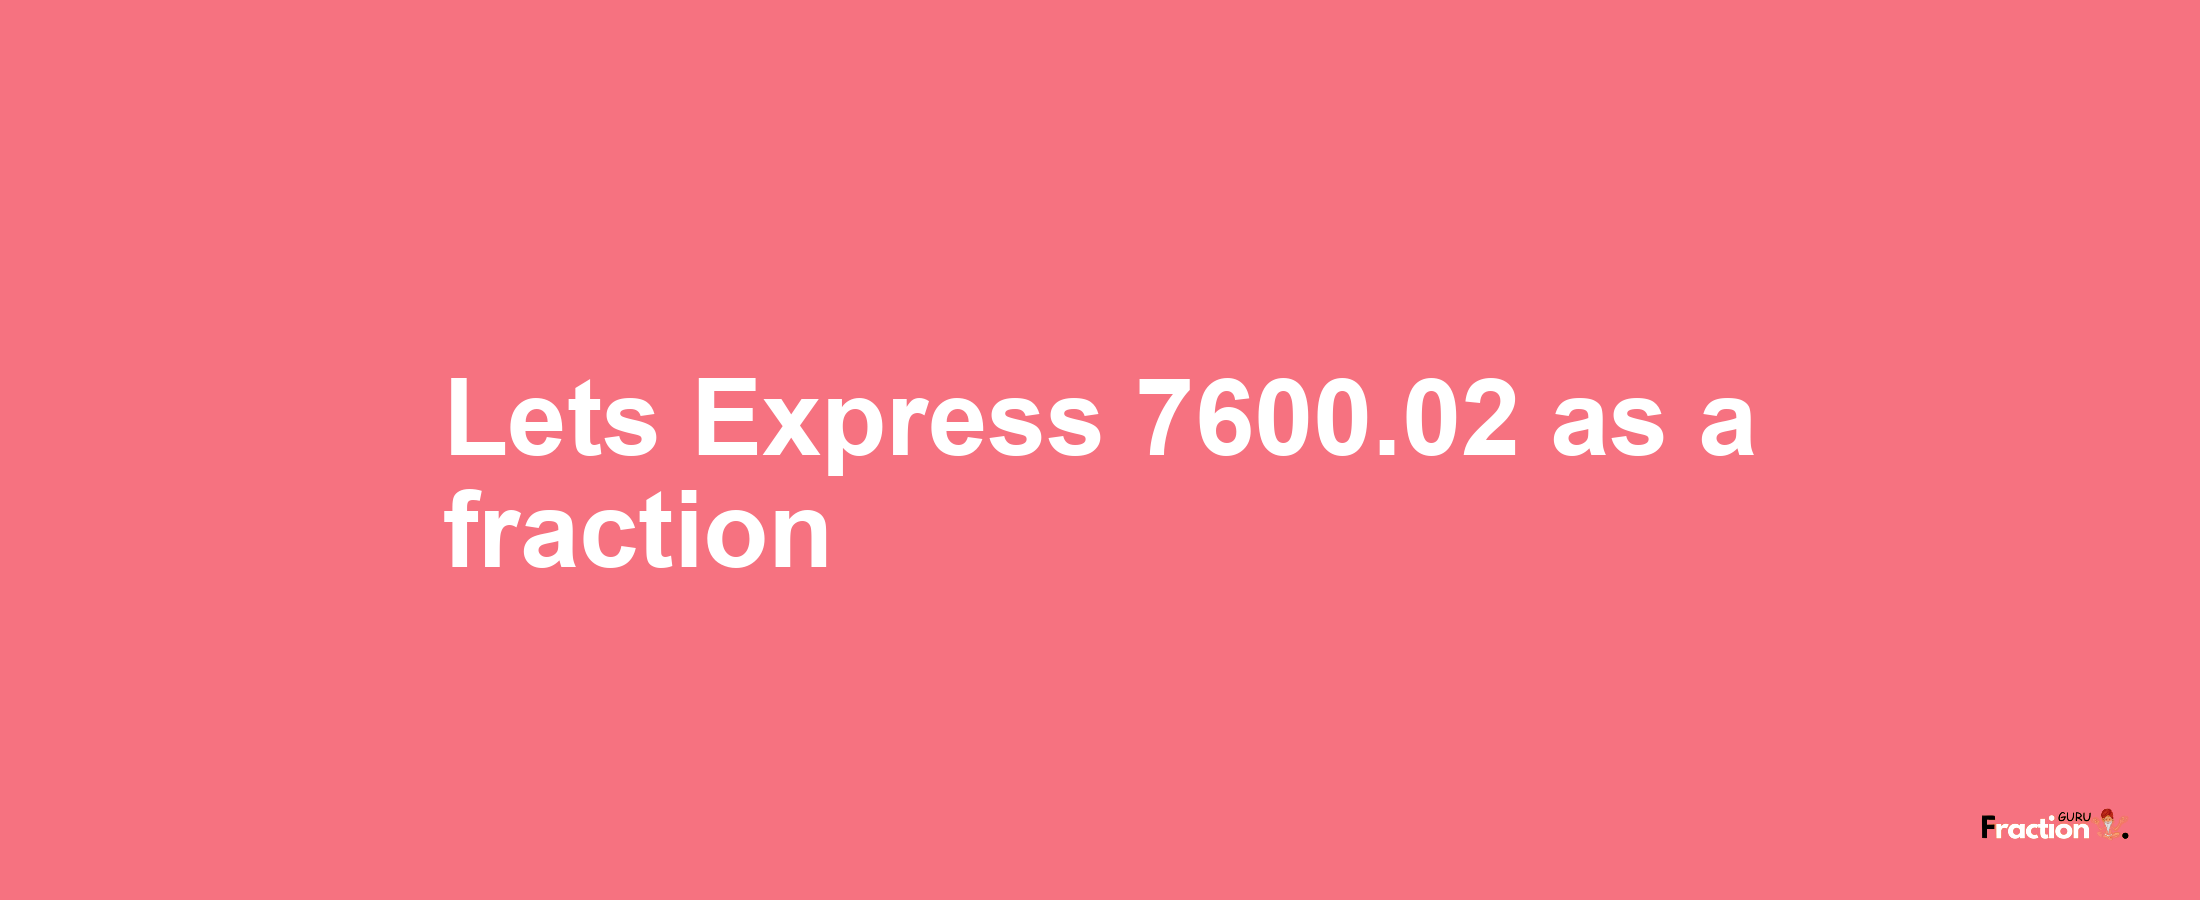 Lets Express 7600.02 as afraction